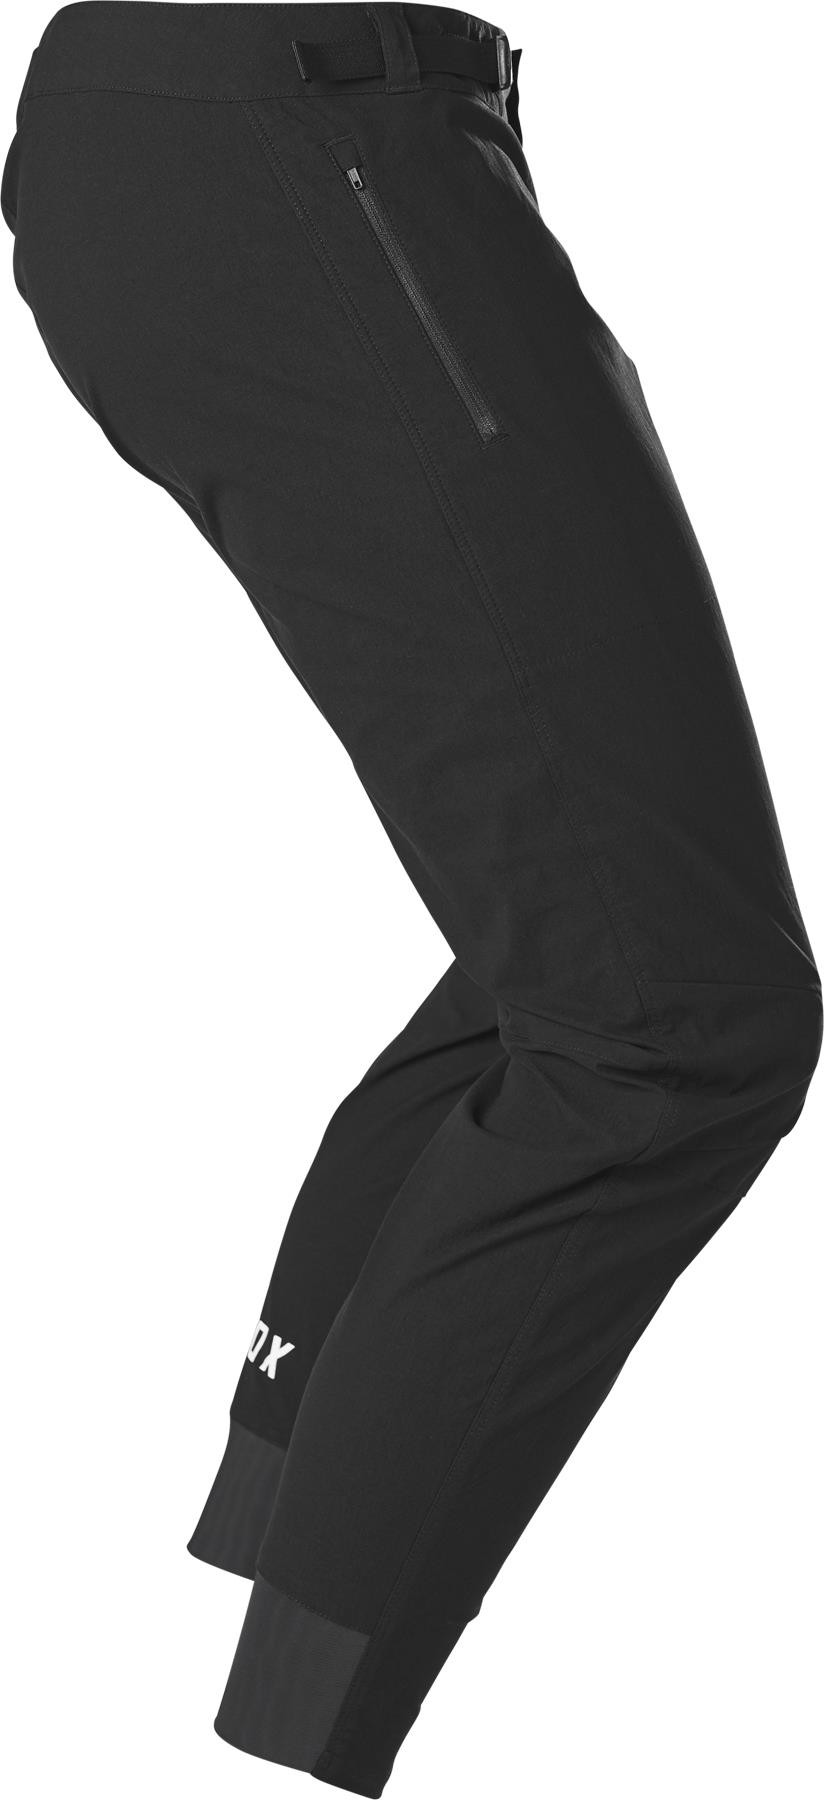 Ranger MTB Cycling Trousers image 2